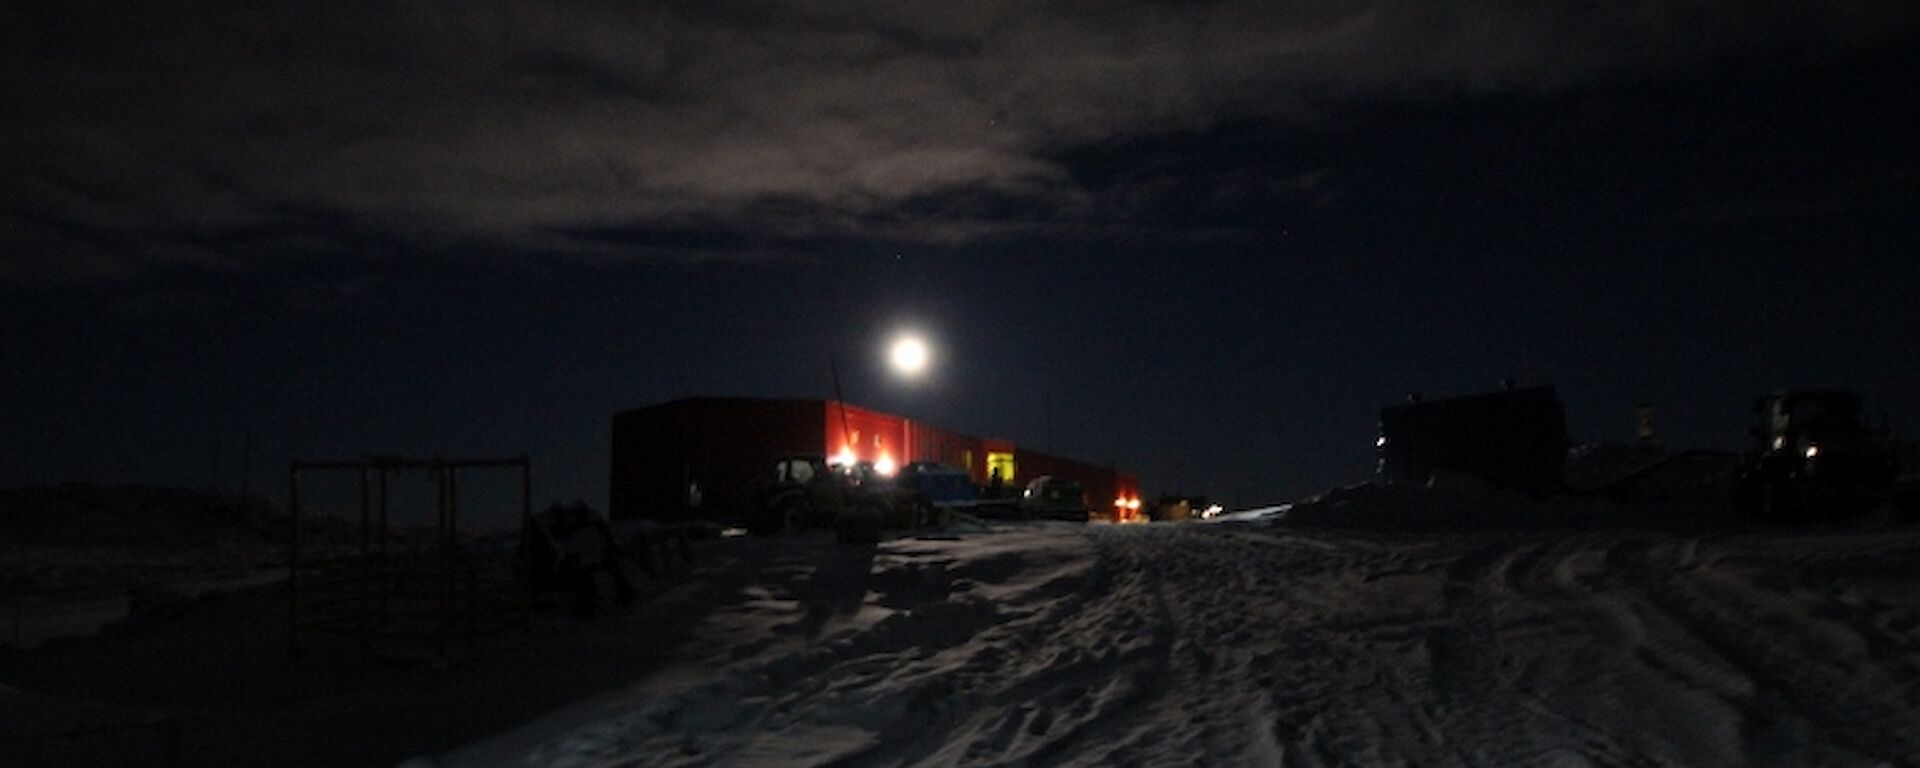 A night shot of Casey’s red shed with some cloud cover and what seems to be a bright moon over the Red Shed